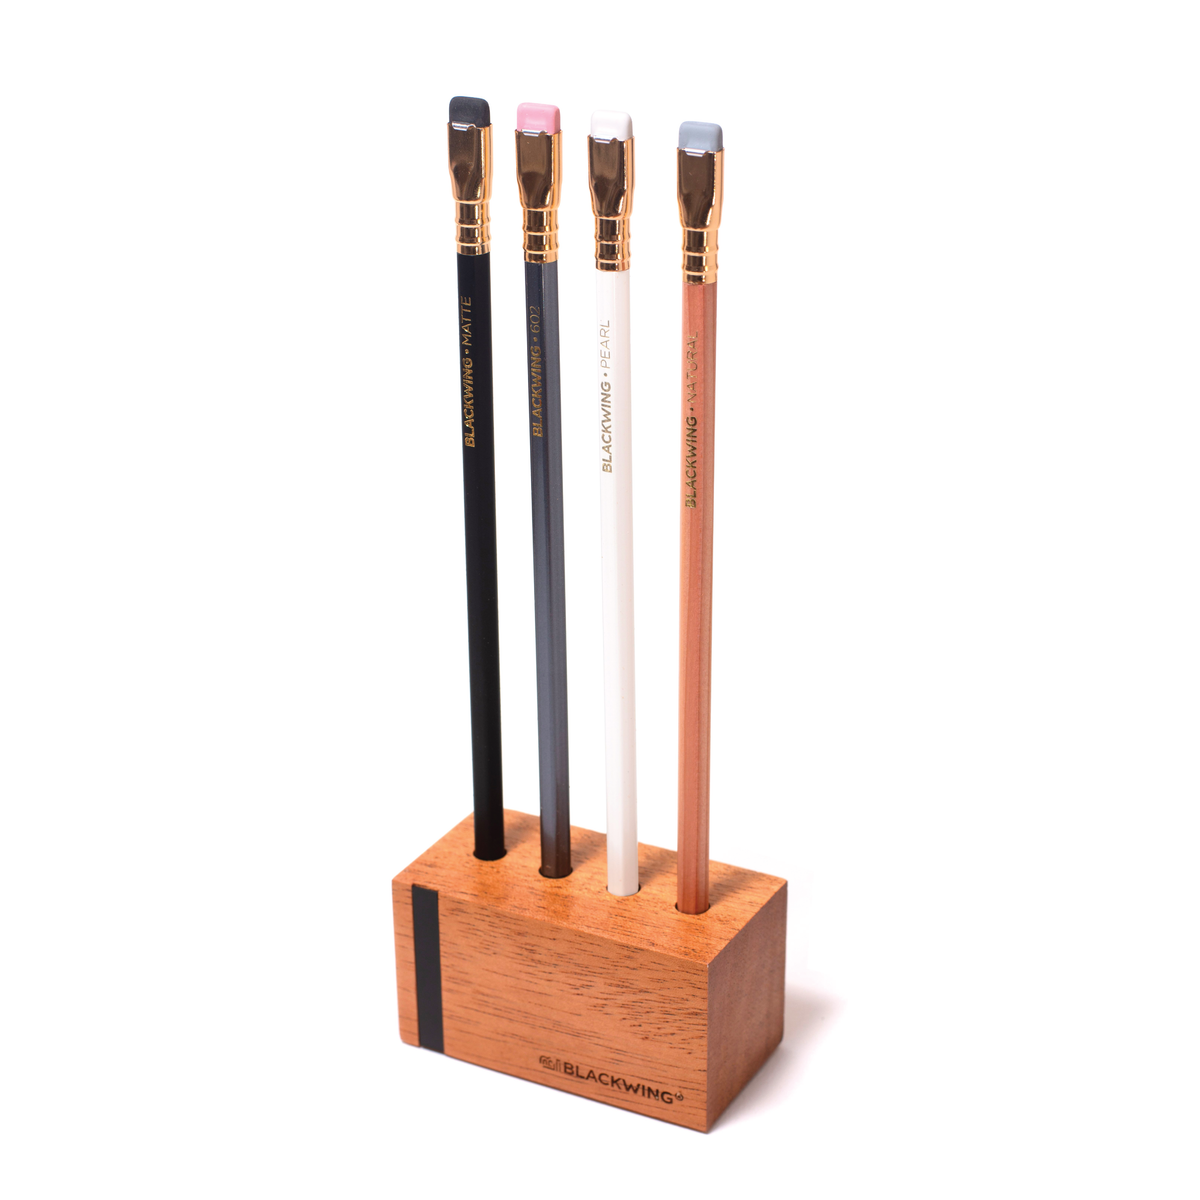 A mahogany pencil holder displaying four Blackwing Upright Four Pencil Display pencils.